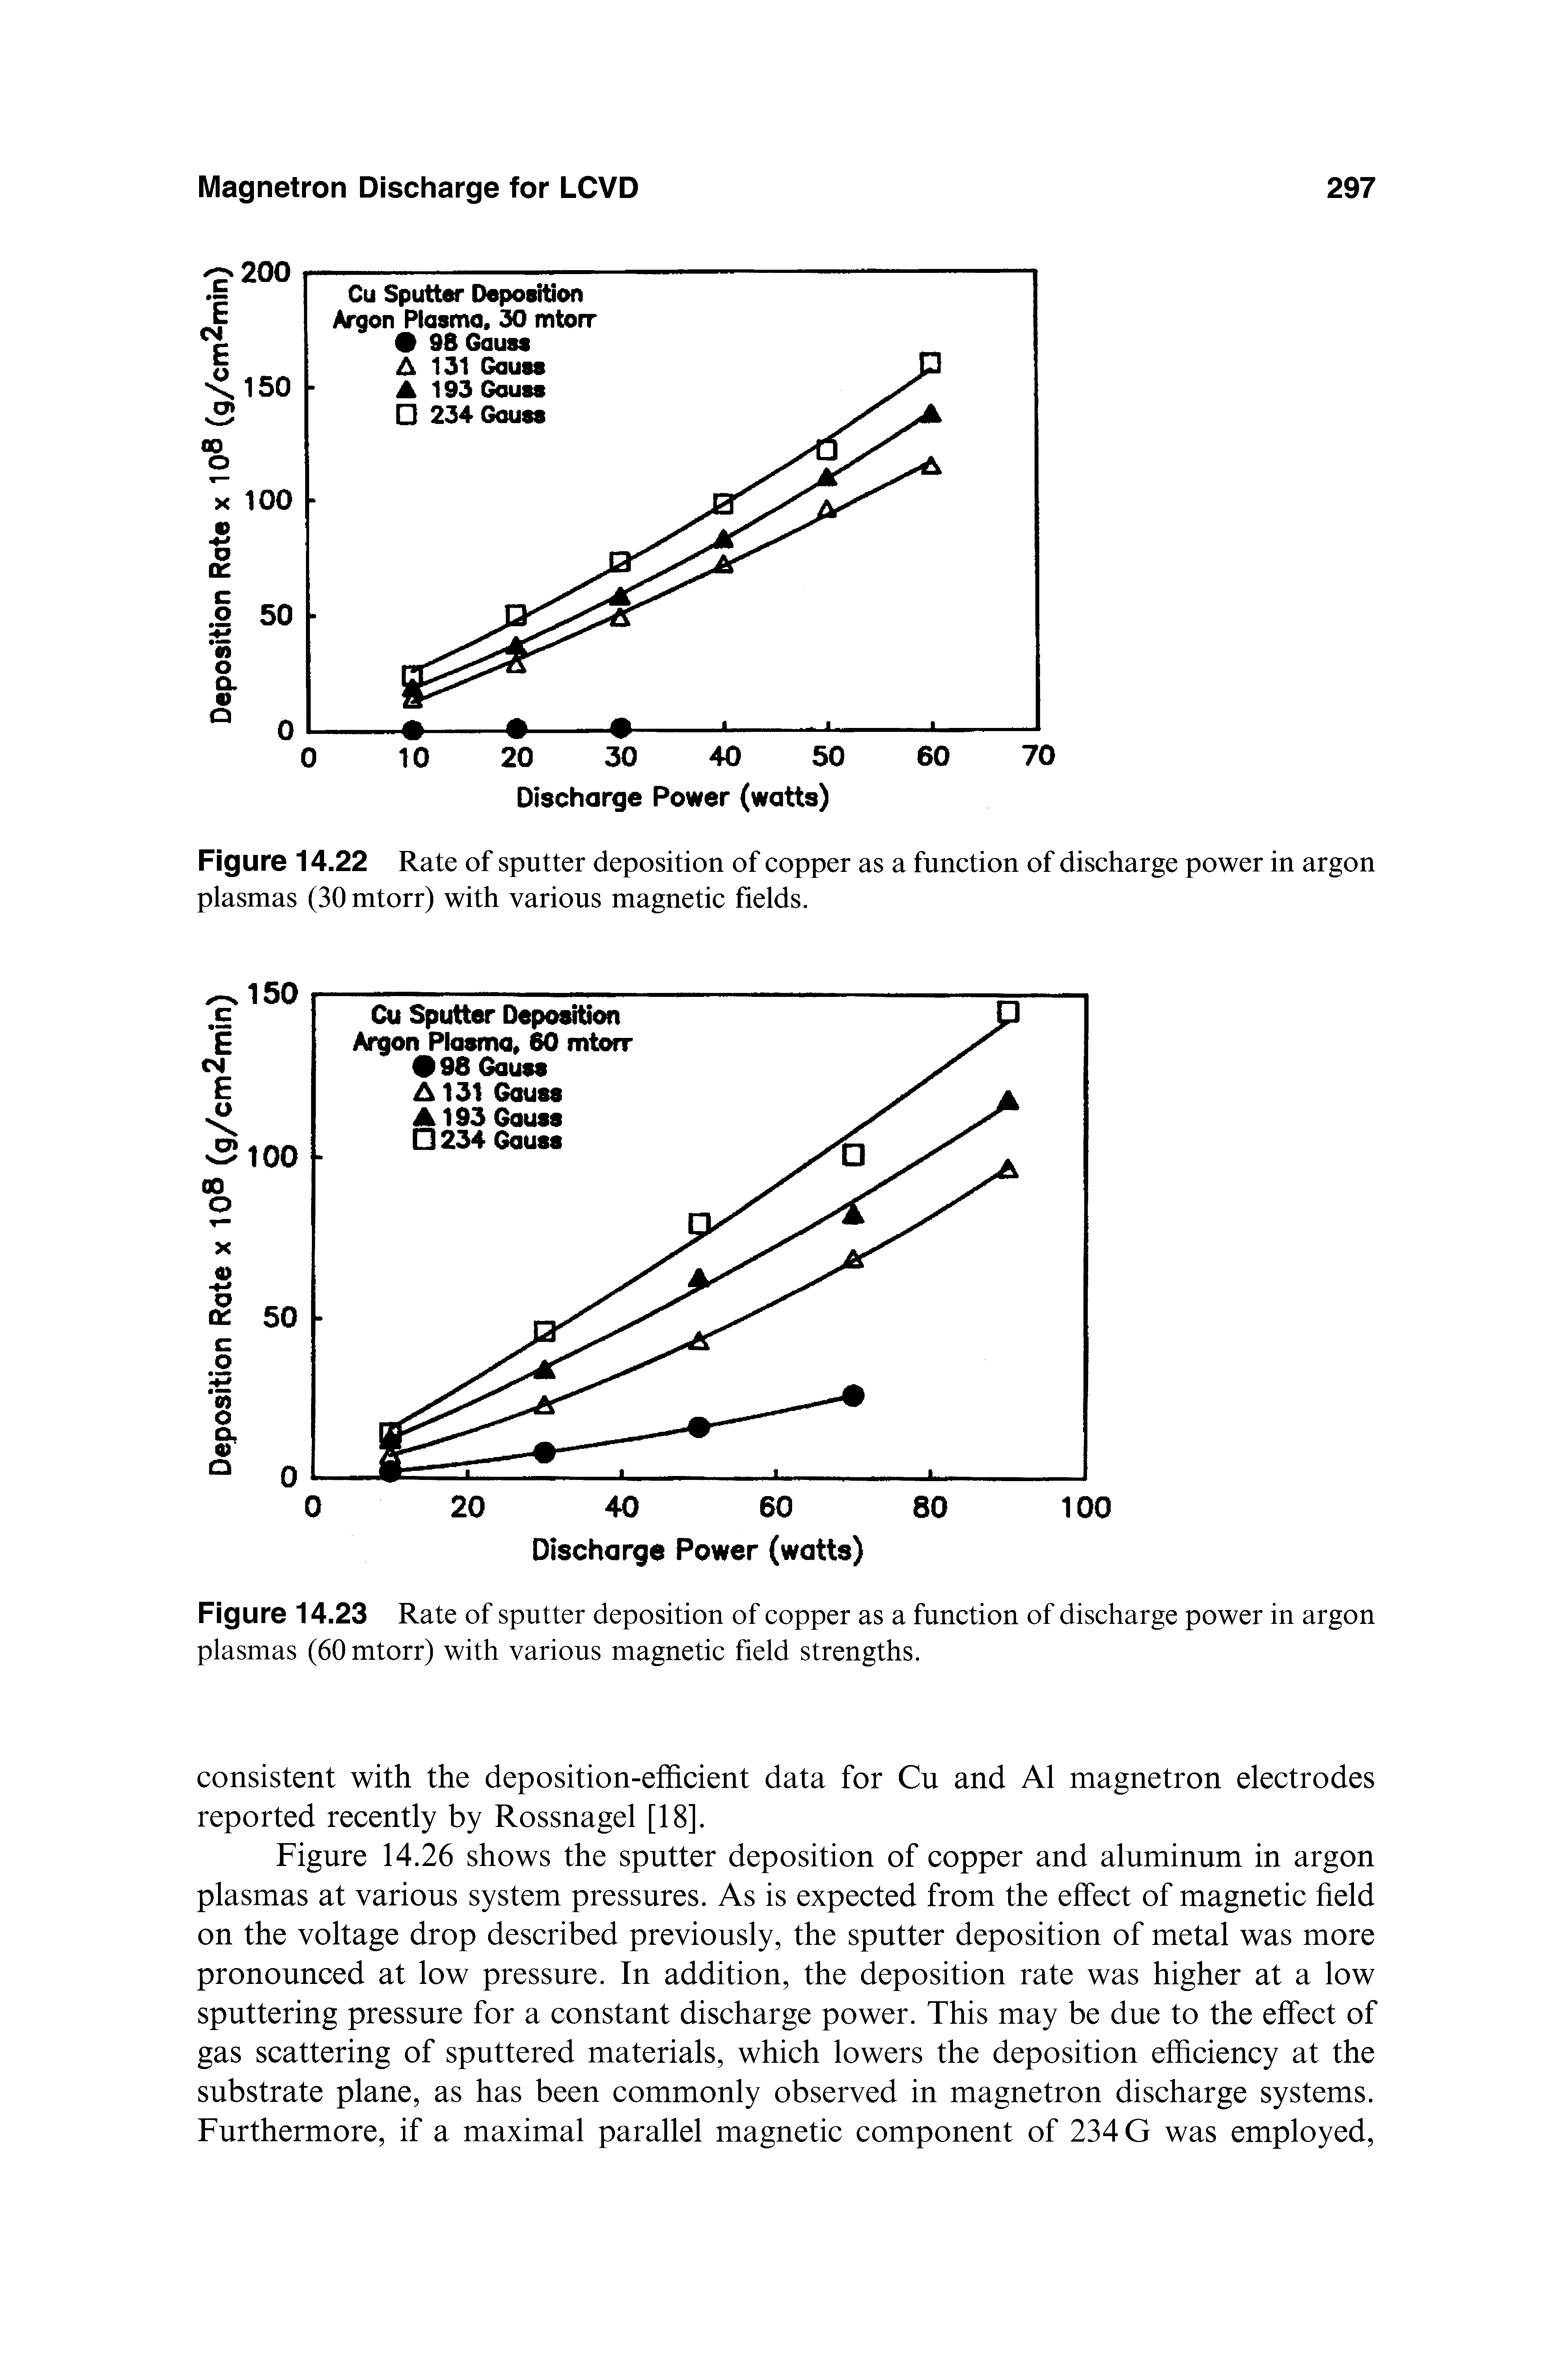 Figure 14.22 Rate of sputter deposition of copper as a function of discharge power in argon plasmas (30 mtorr) with various magnetic fields.